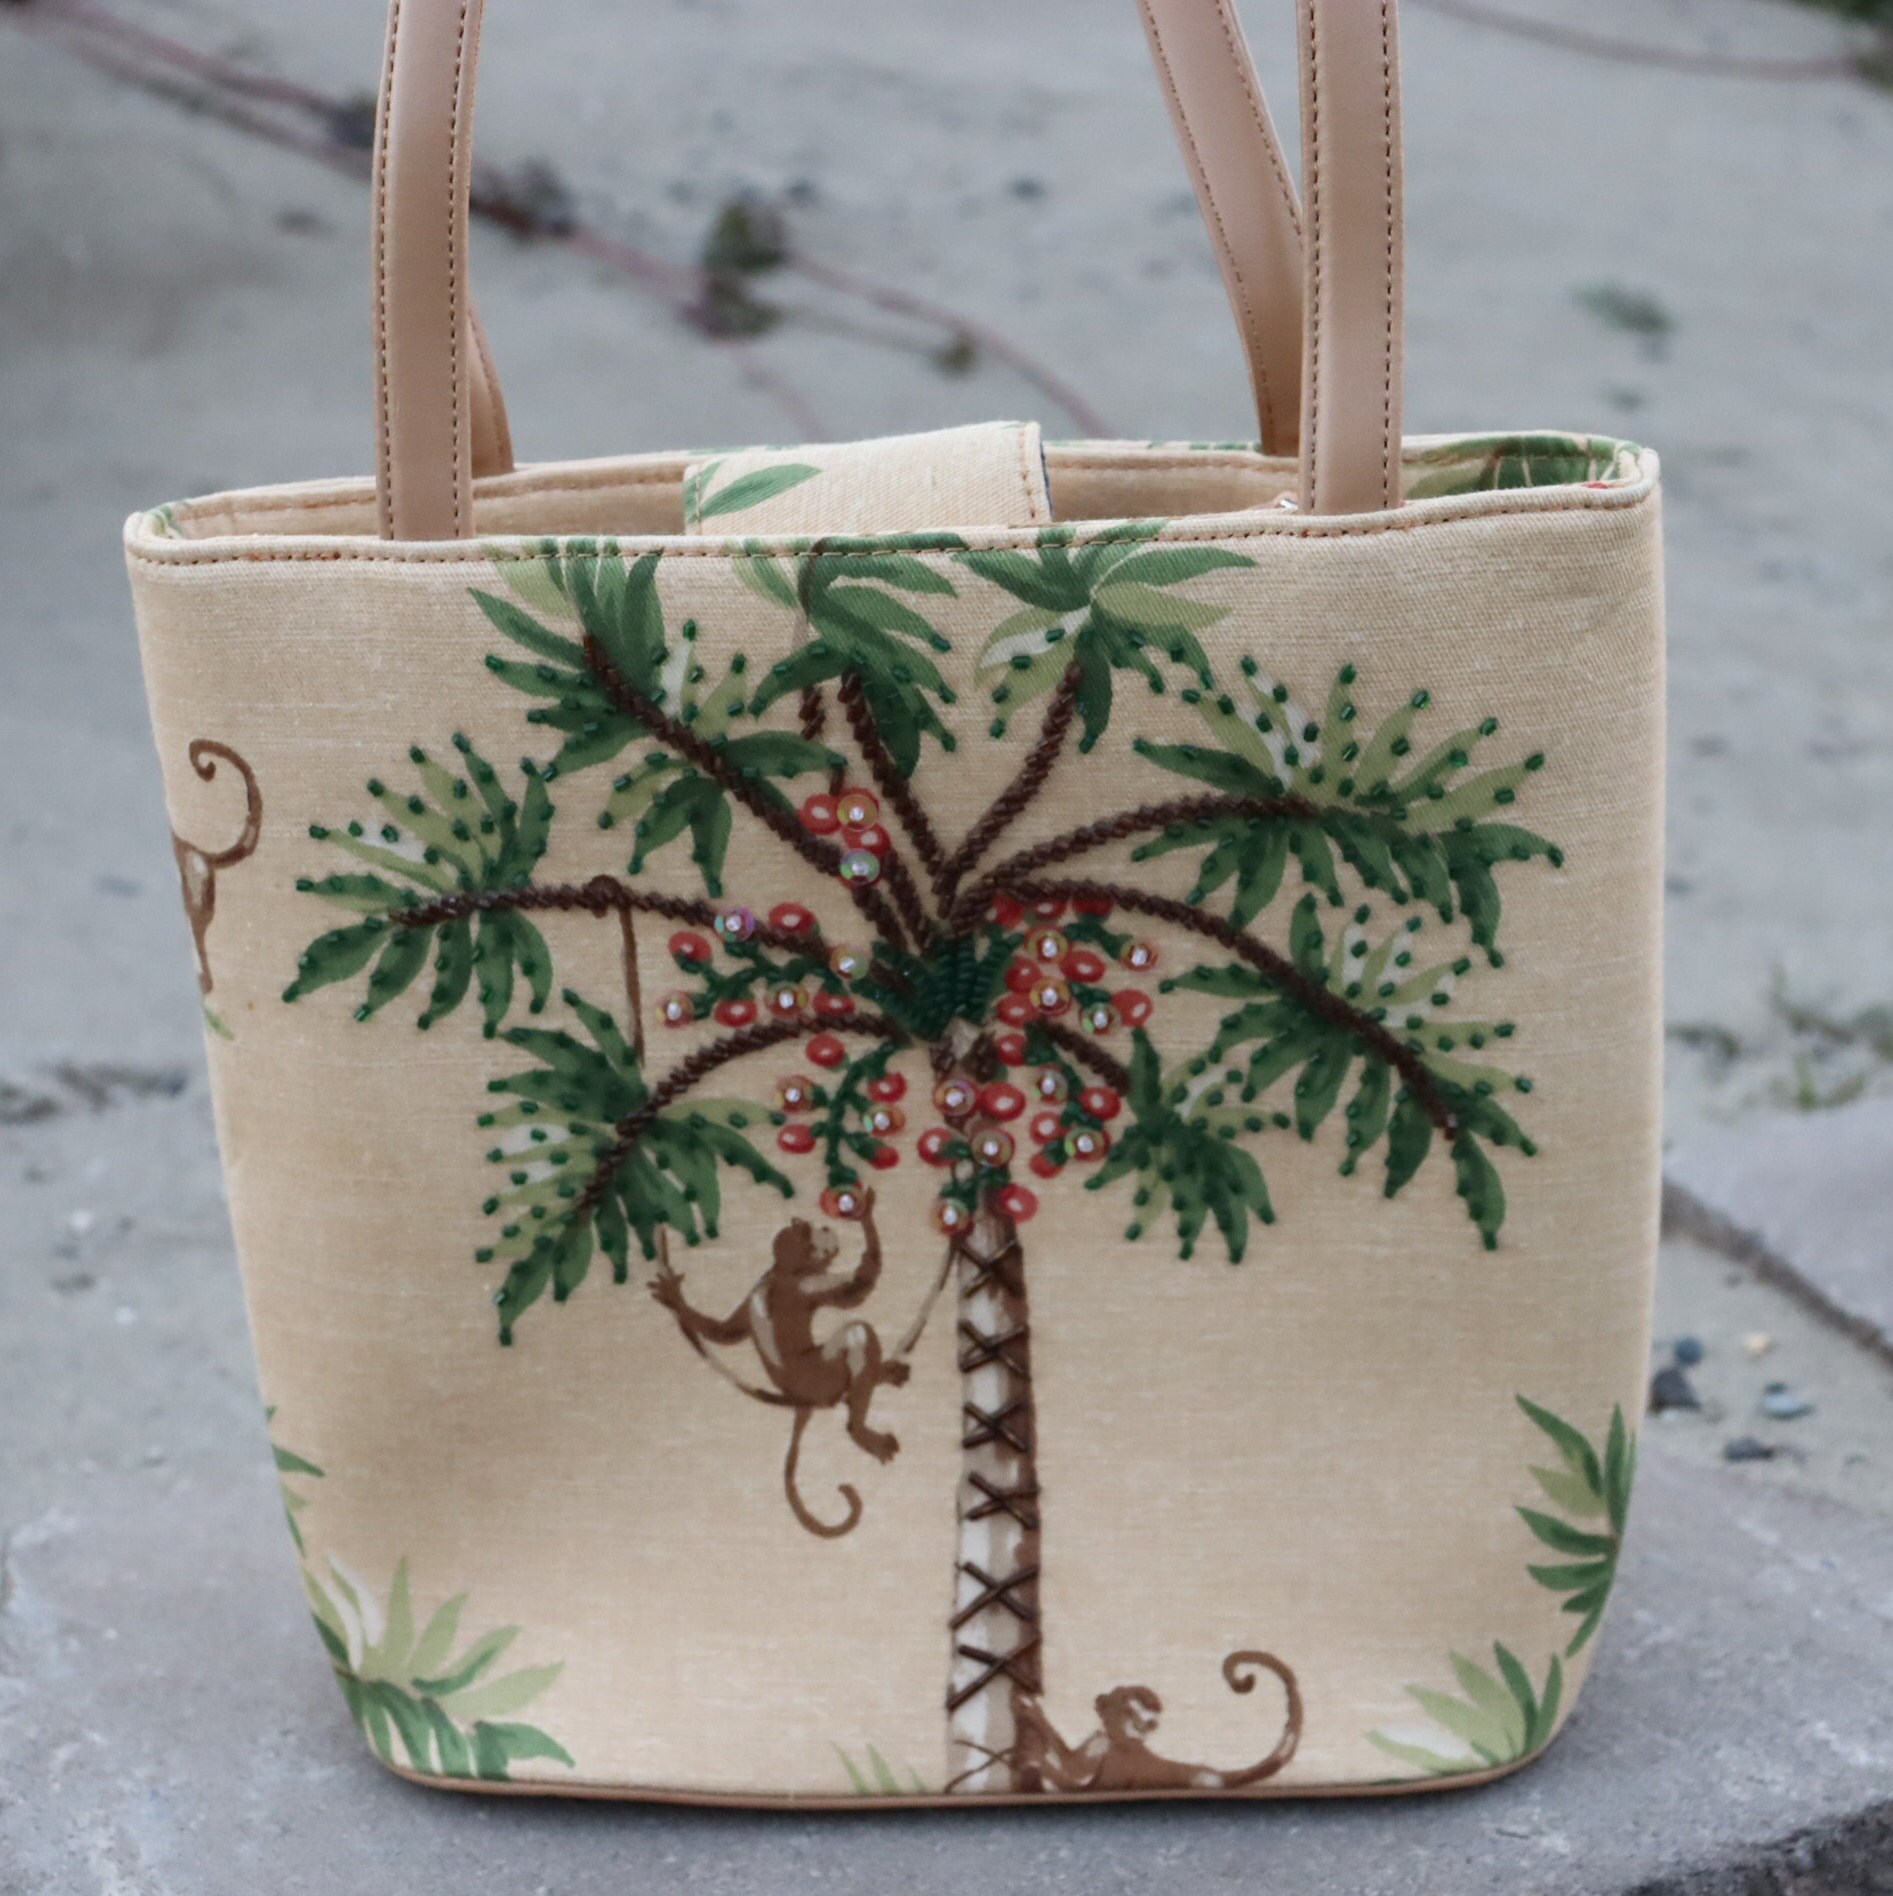 SunLily Bright Side Color Changing Tote Bag, Palm Trees